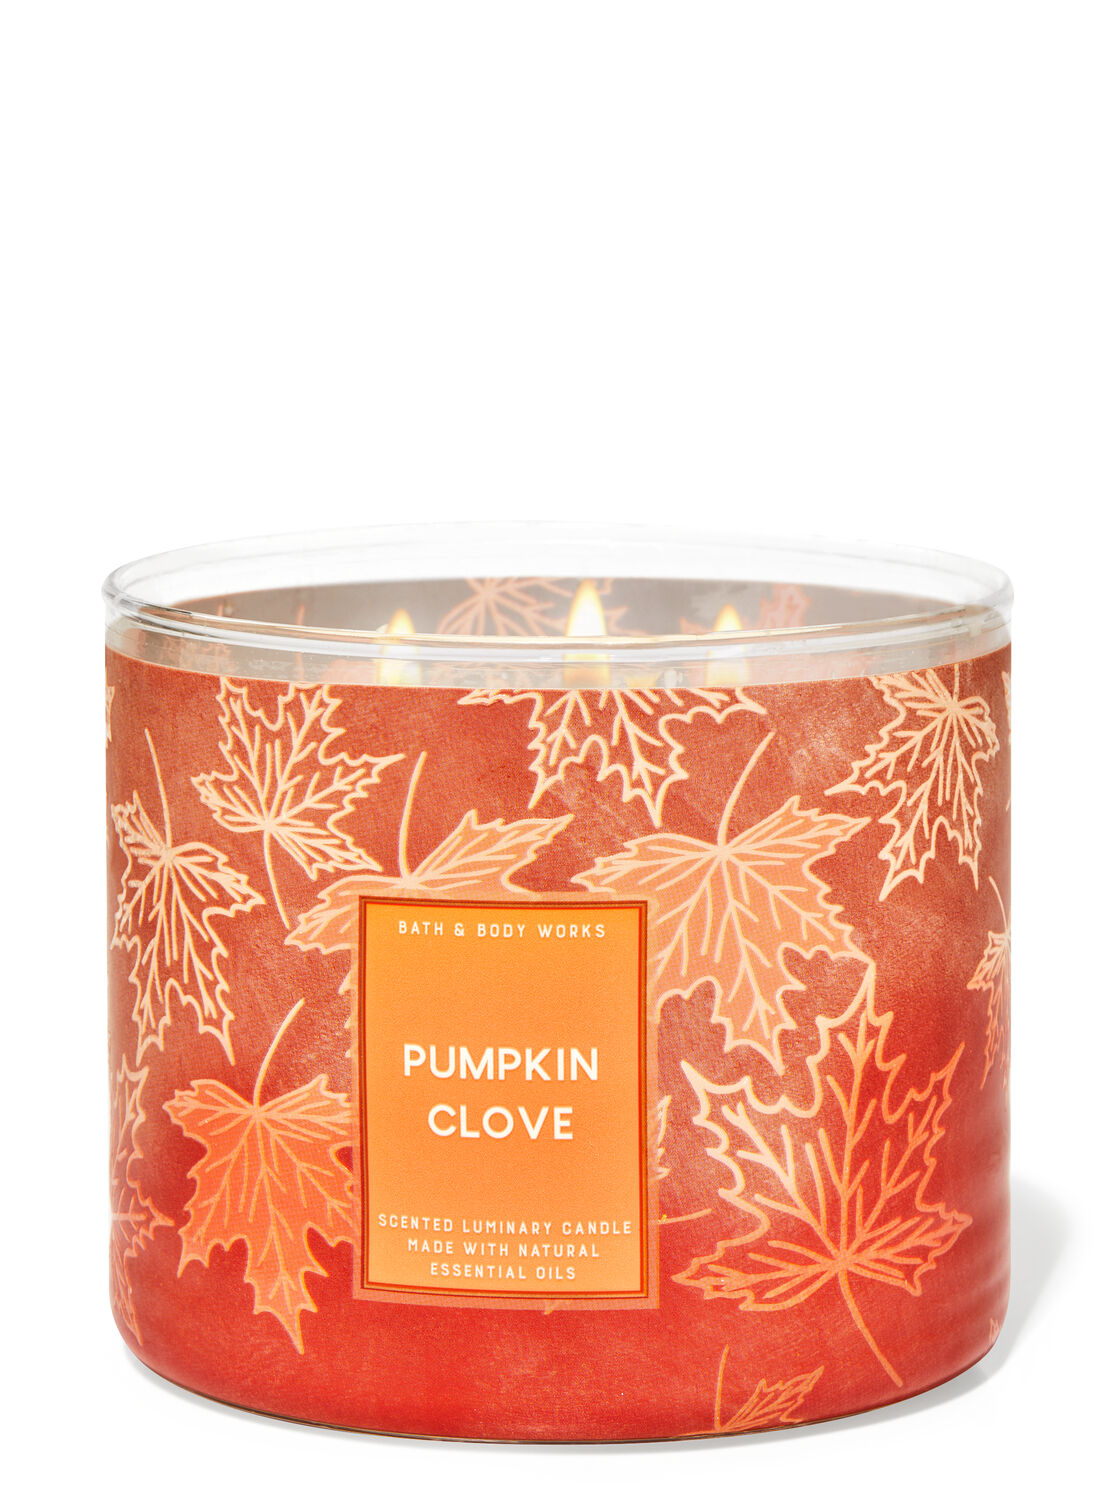 1 Bath & Body Works SPICED COCONUT MILK Large 3-Wick Filled Candle NUTMEG CREAM 